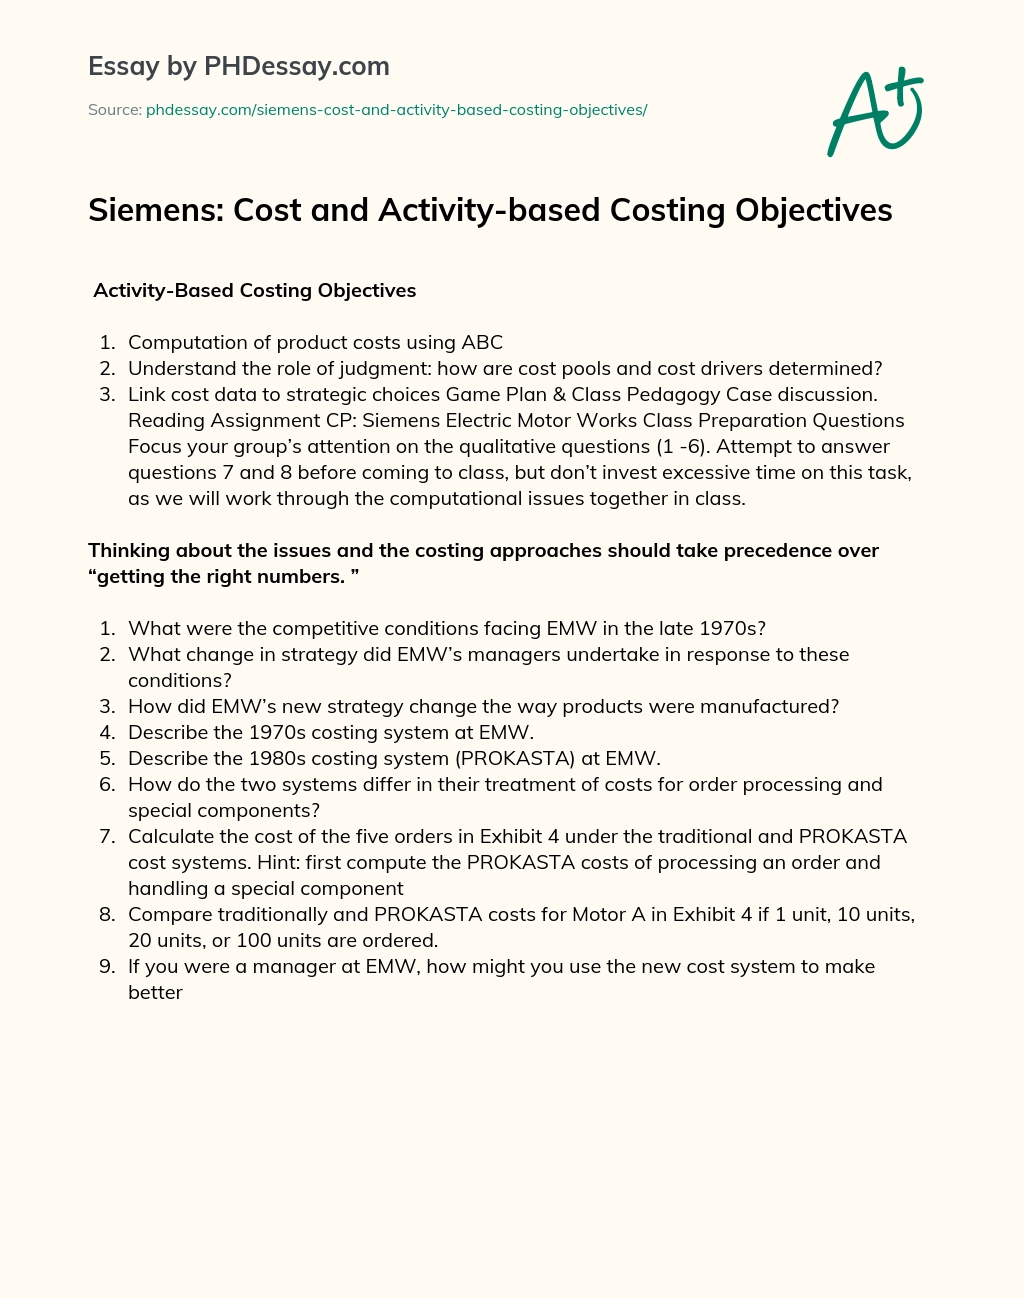 Siemens: Cost and Activity-based Costing Objectives essay